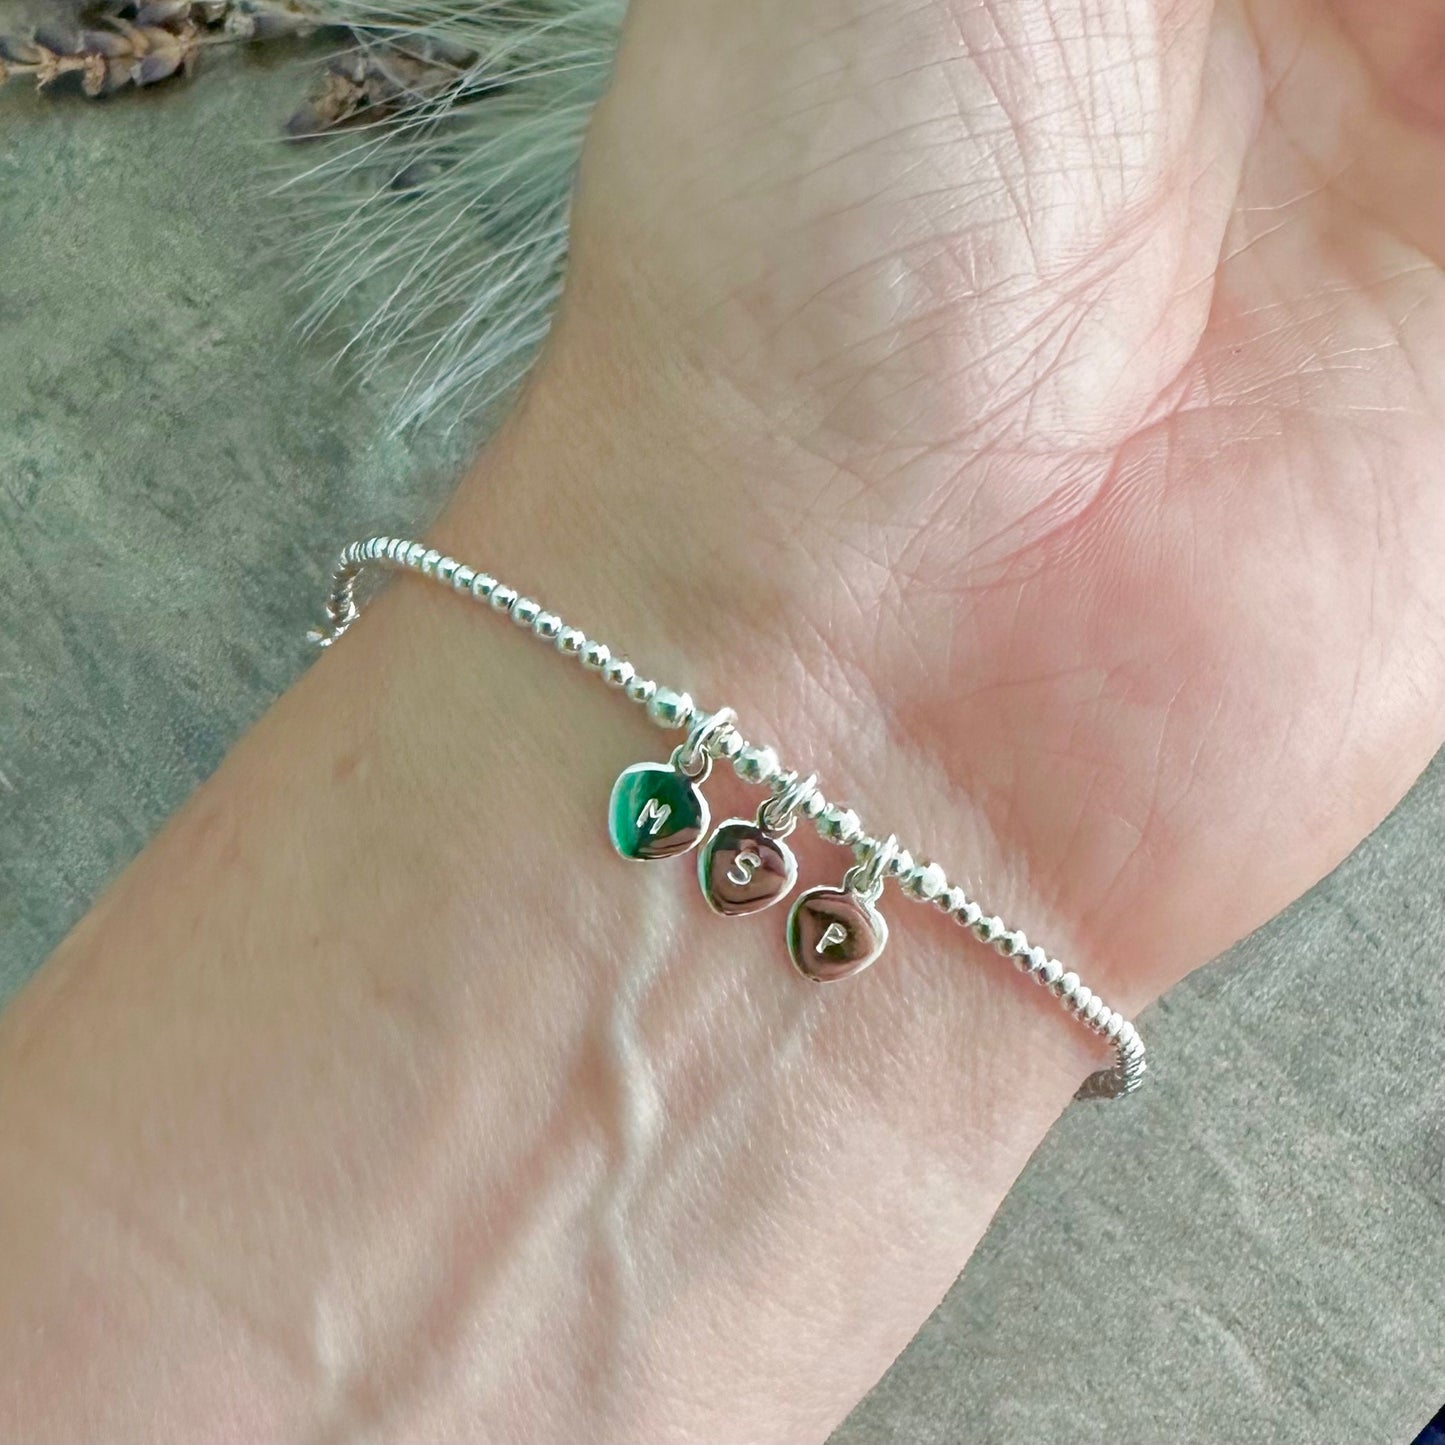 Grandmother Gift, Family Initials Bracelet in Sterling Silver